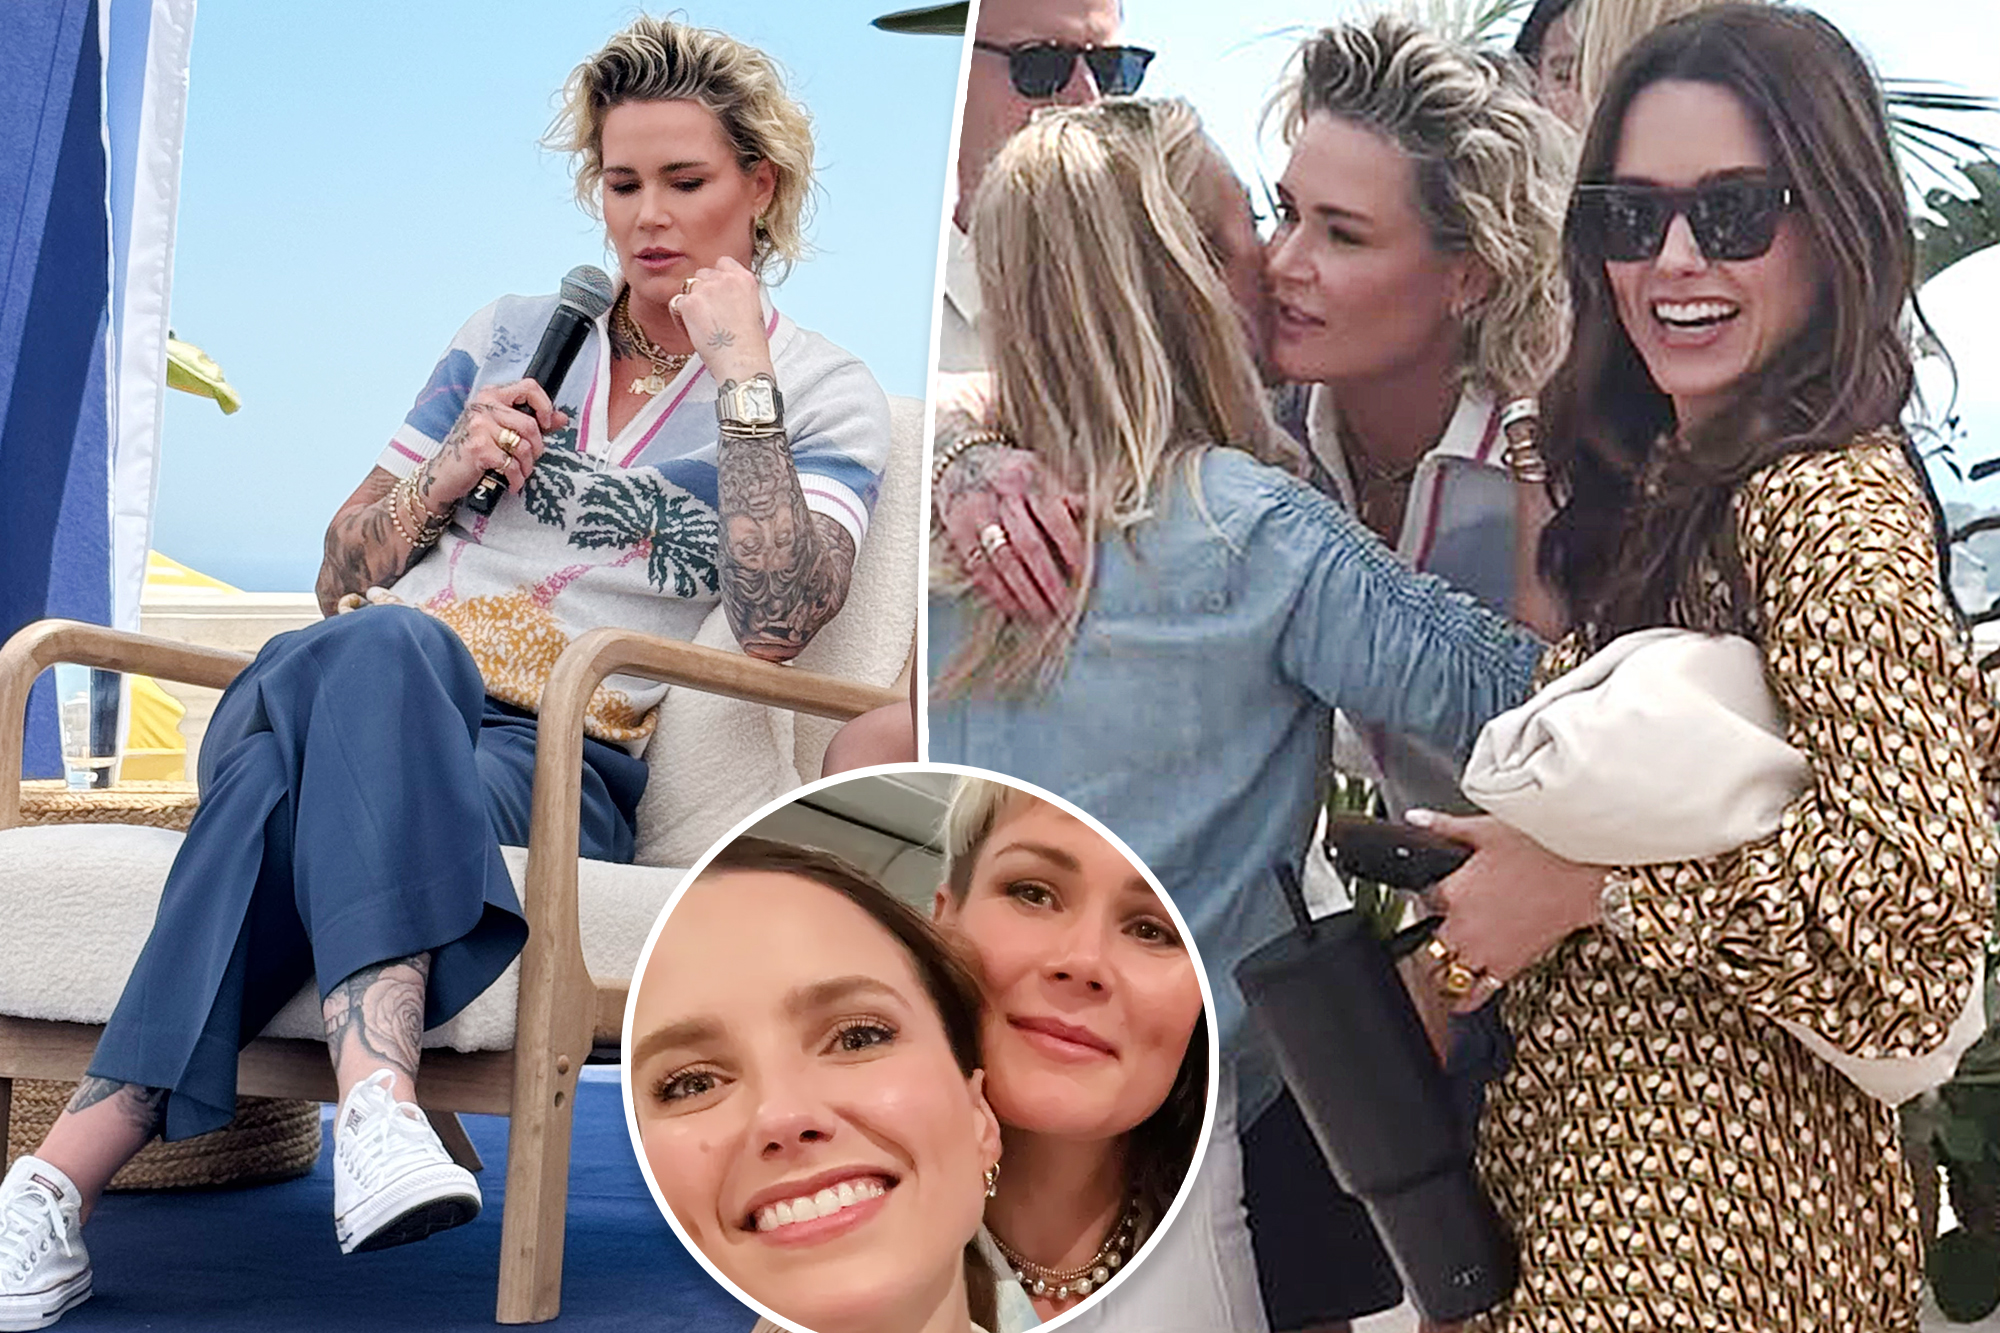 Sophia Bush's Heartwarming Support for Ashlyn Harris Steals the Show at Cannes Lions